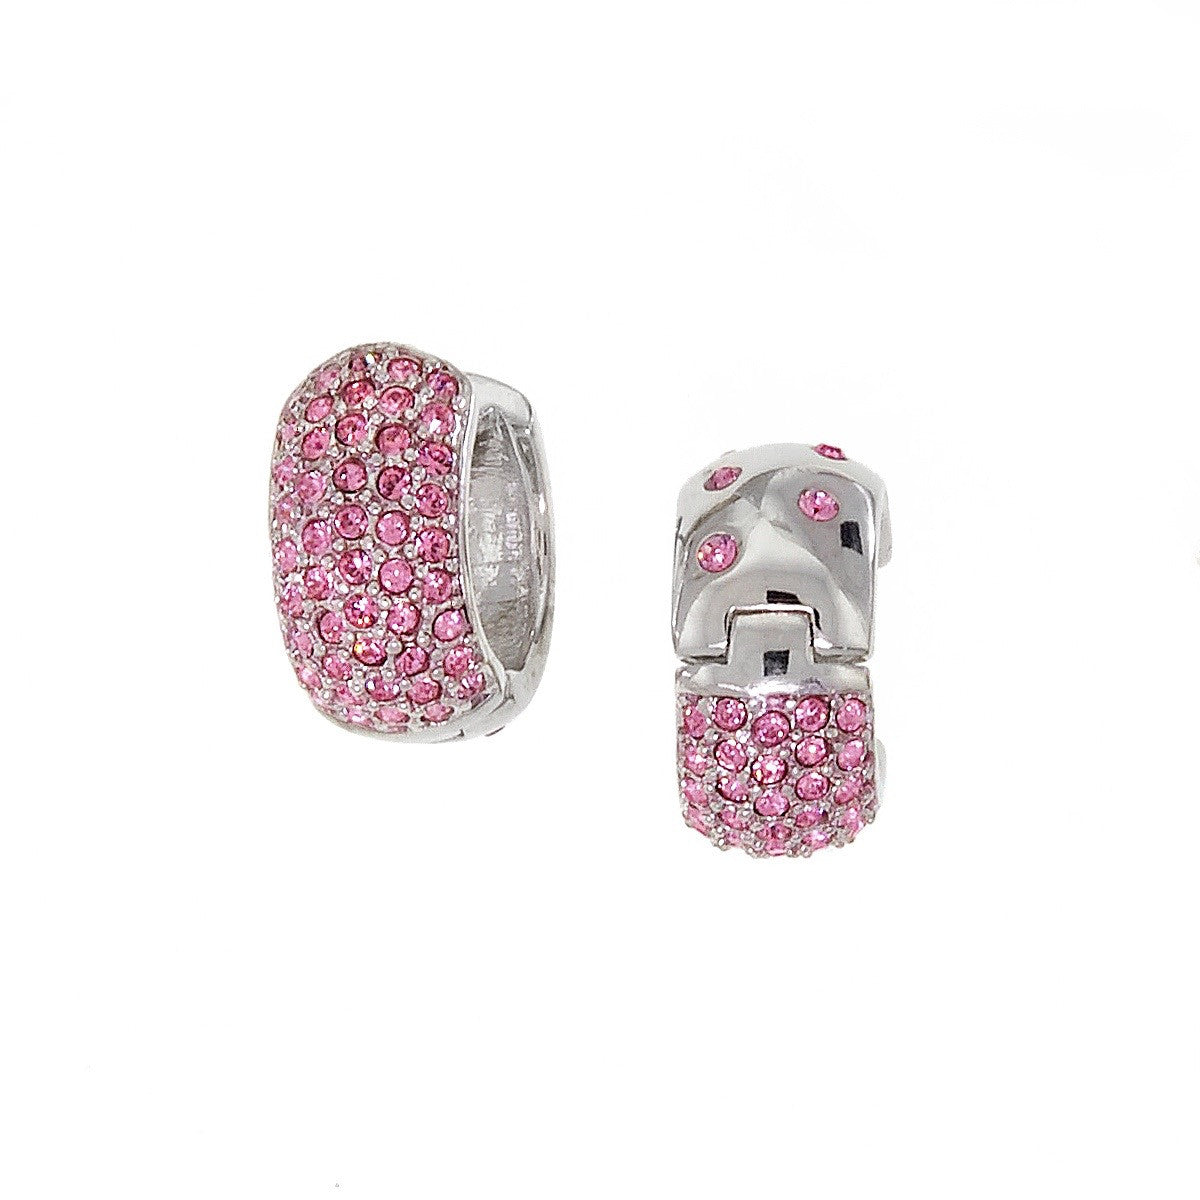 Small Reversable Huggies with Pink Swarovski Crystals by Bobby Schandra